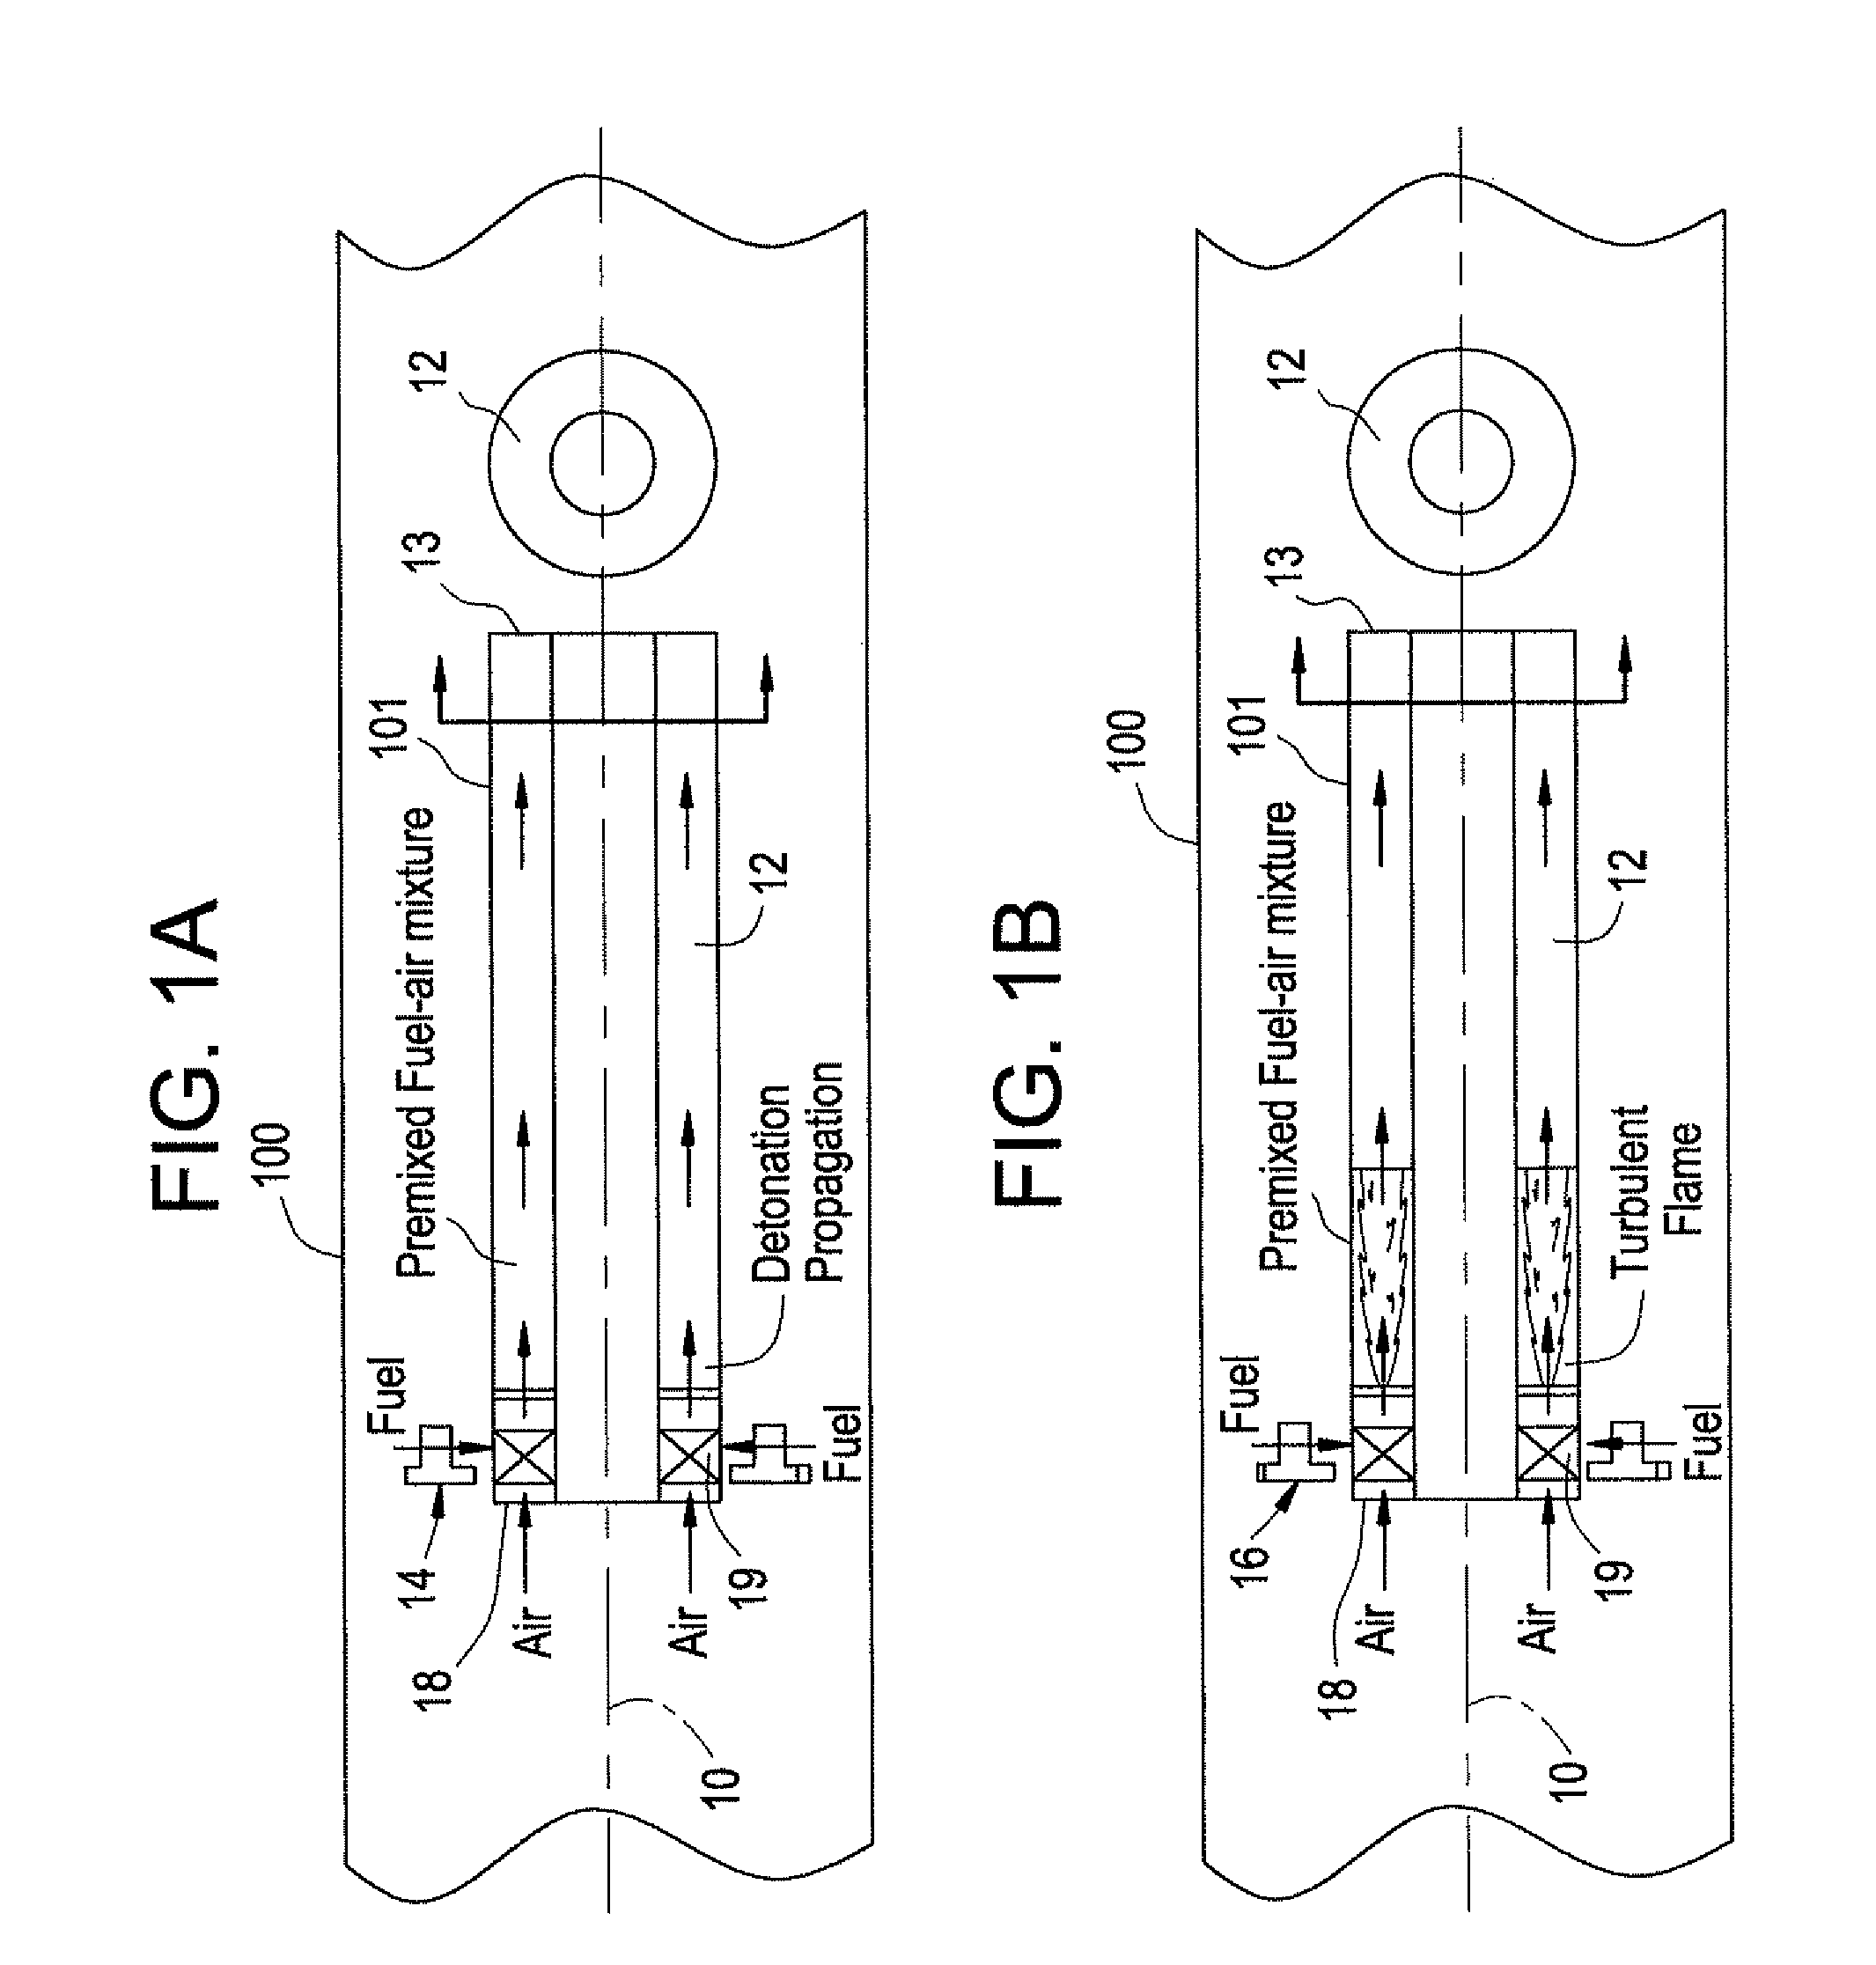 Dual mode combustion operation of a pulse detonation combustor in a hybrid engine